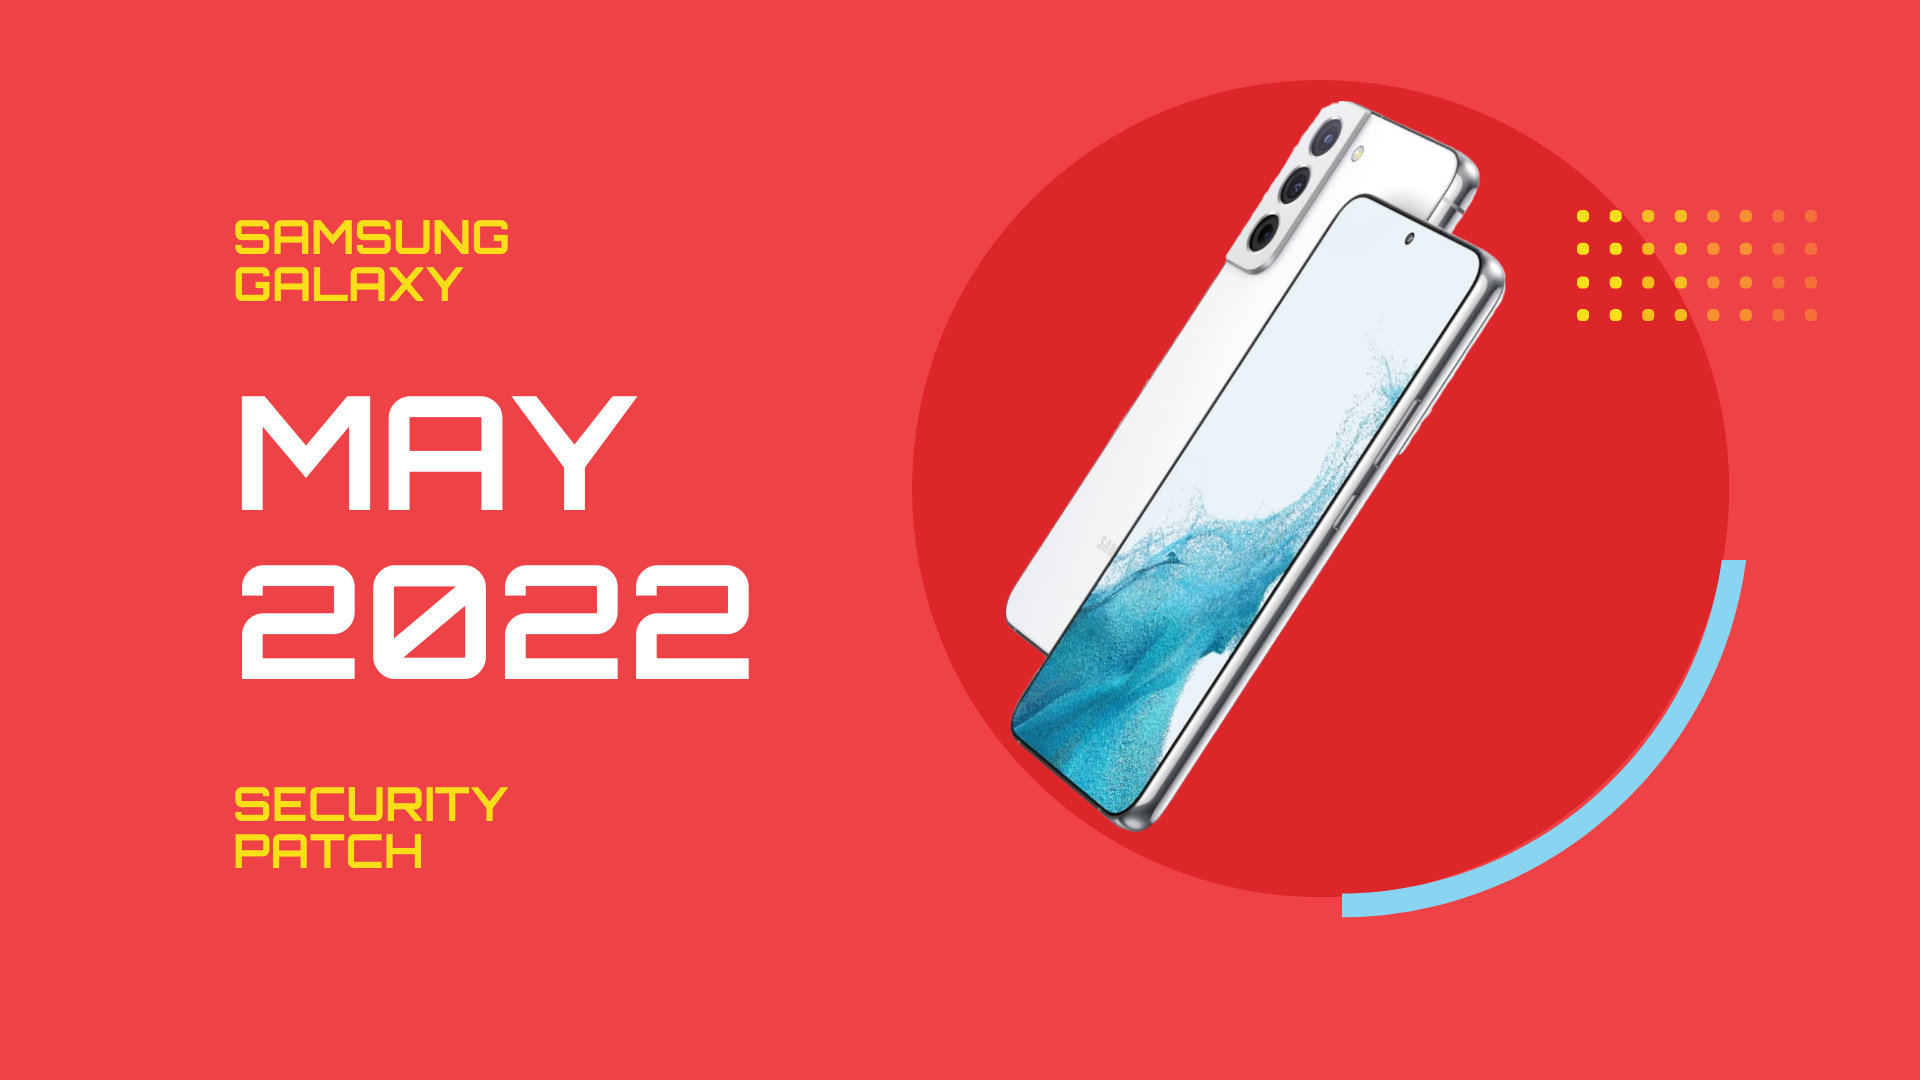 Samsung Galaxy S22 May 2022 Security Patch released